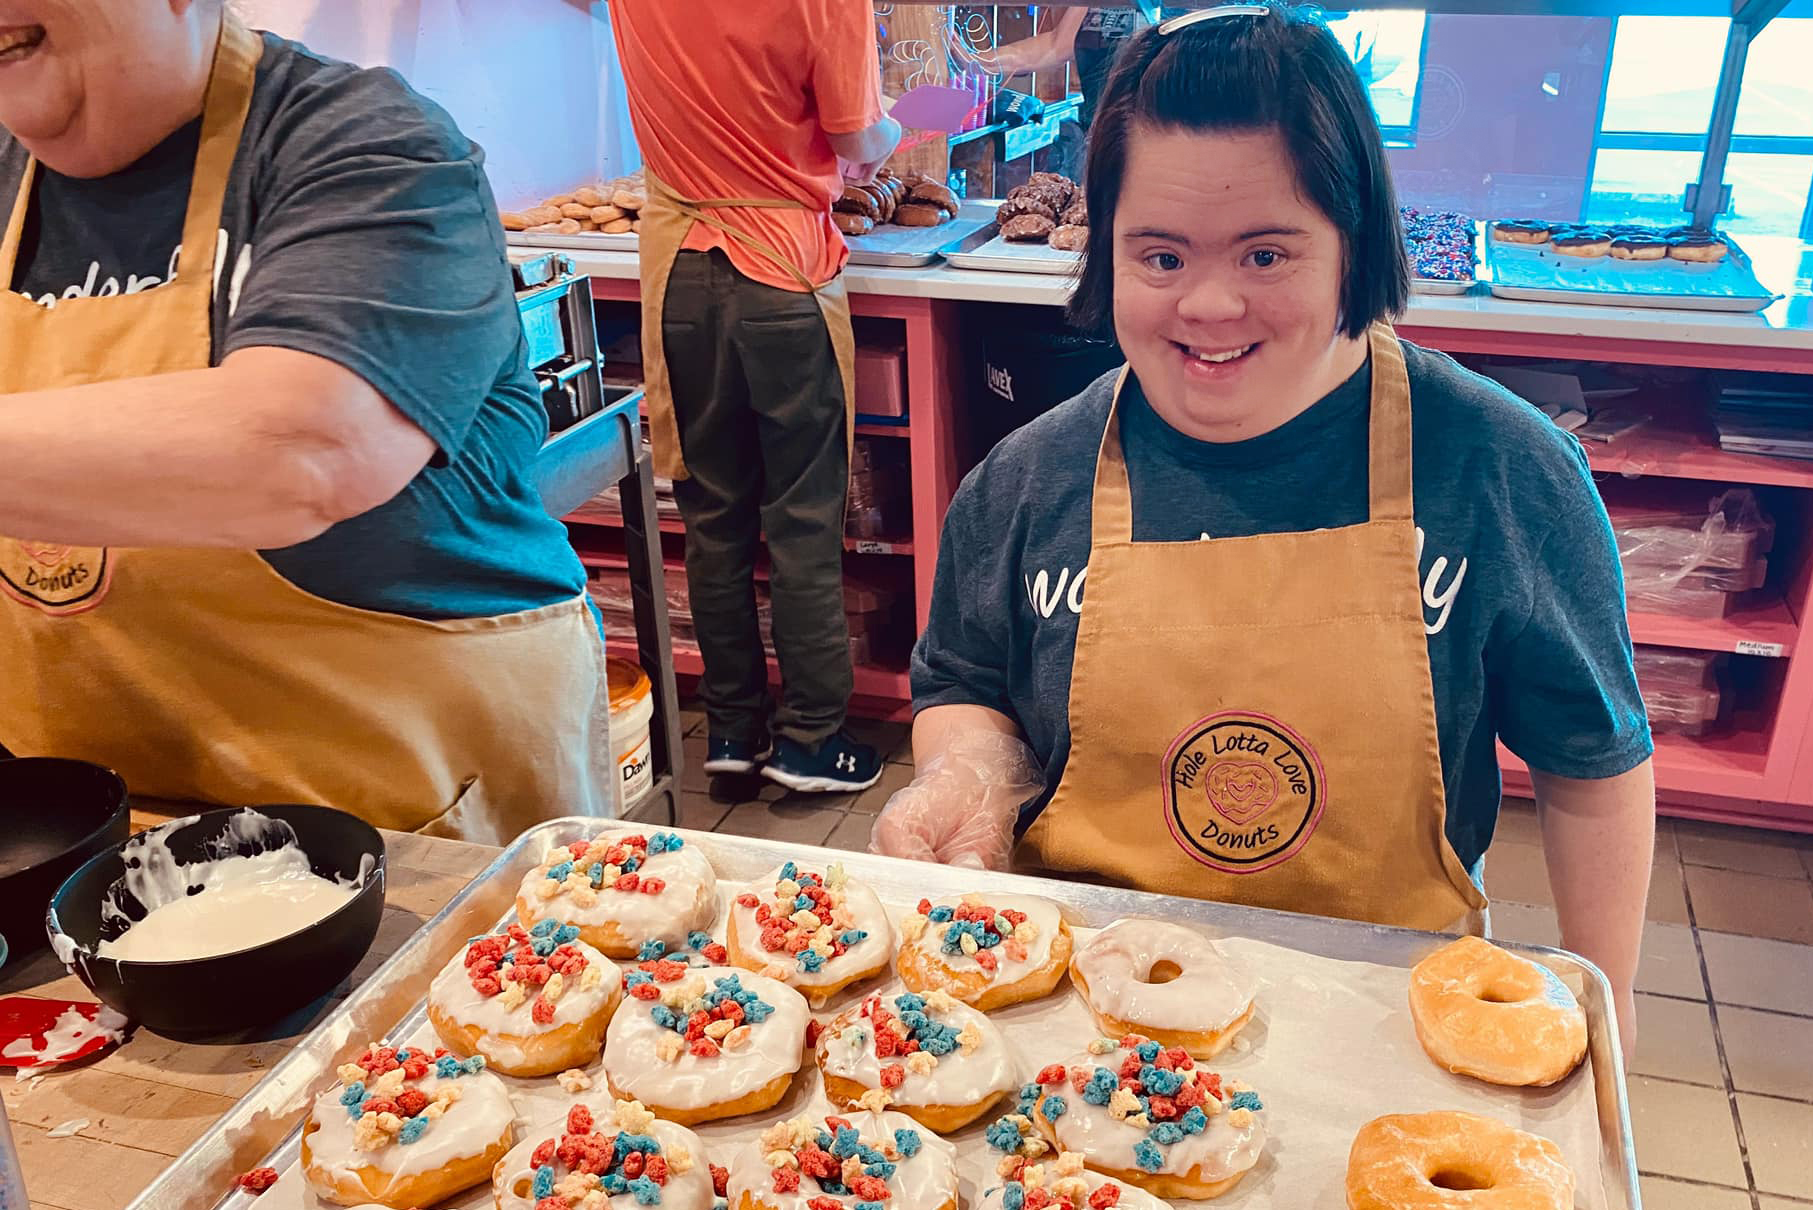 Transylvania alumnus launches doughnut shop to employ workers with special abilities